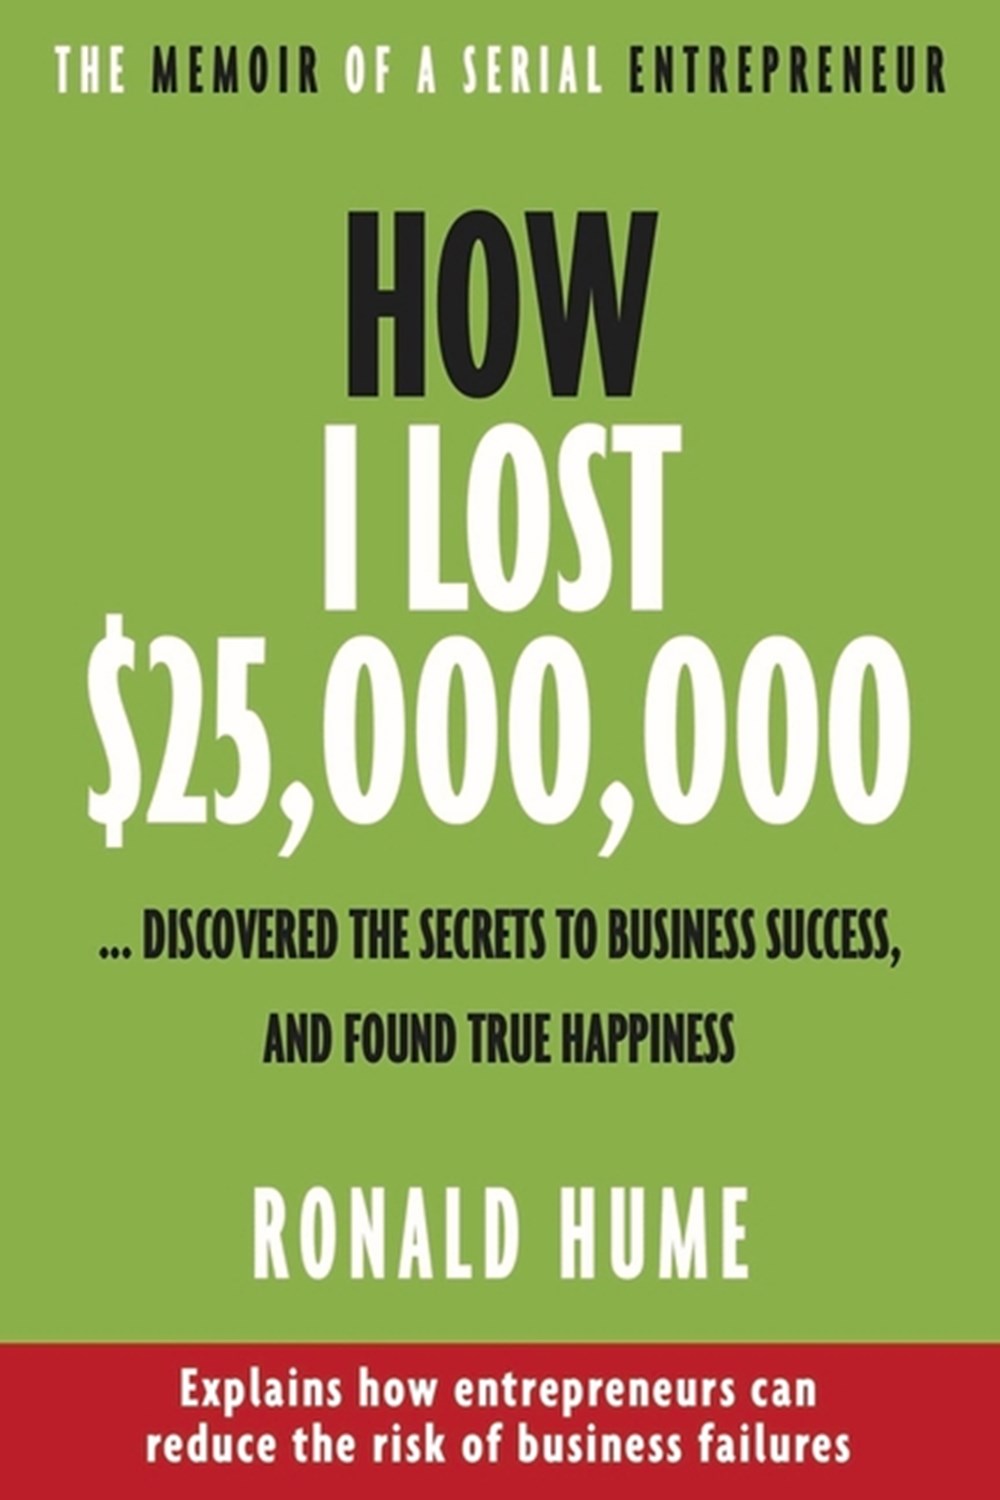 How I Lost $25,000,000 ... Discovered the Secrets to Business Success, and Found True Happiness